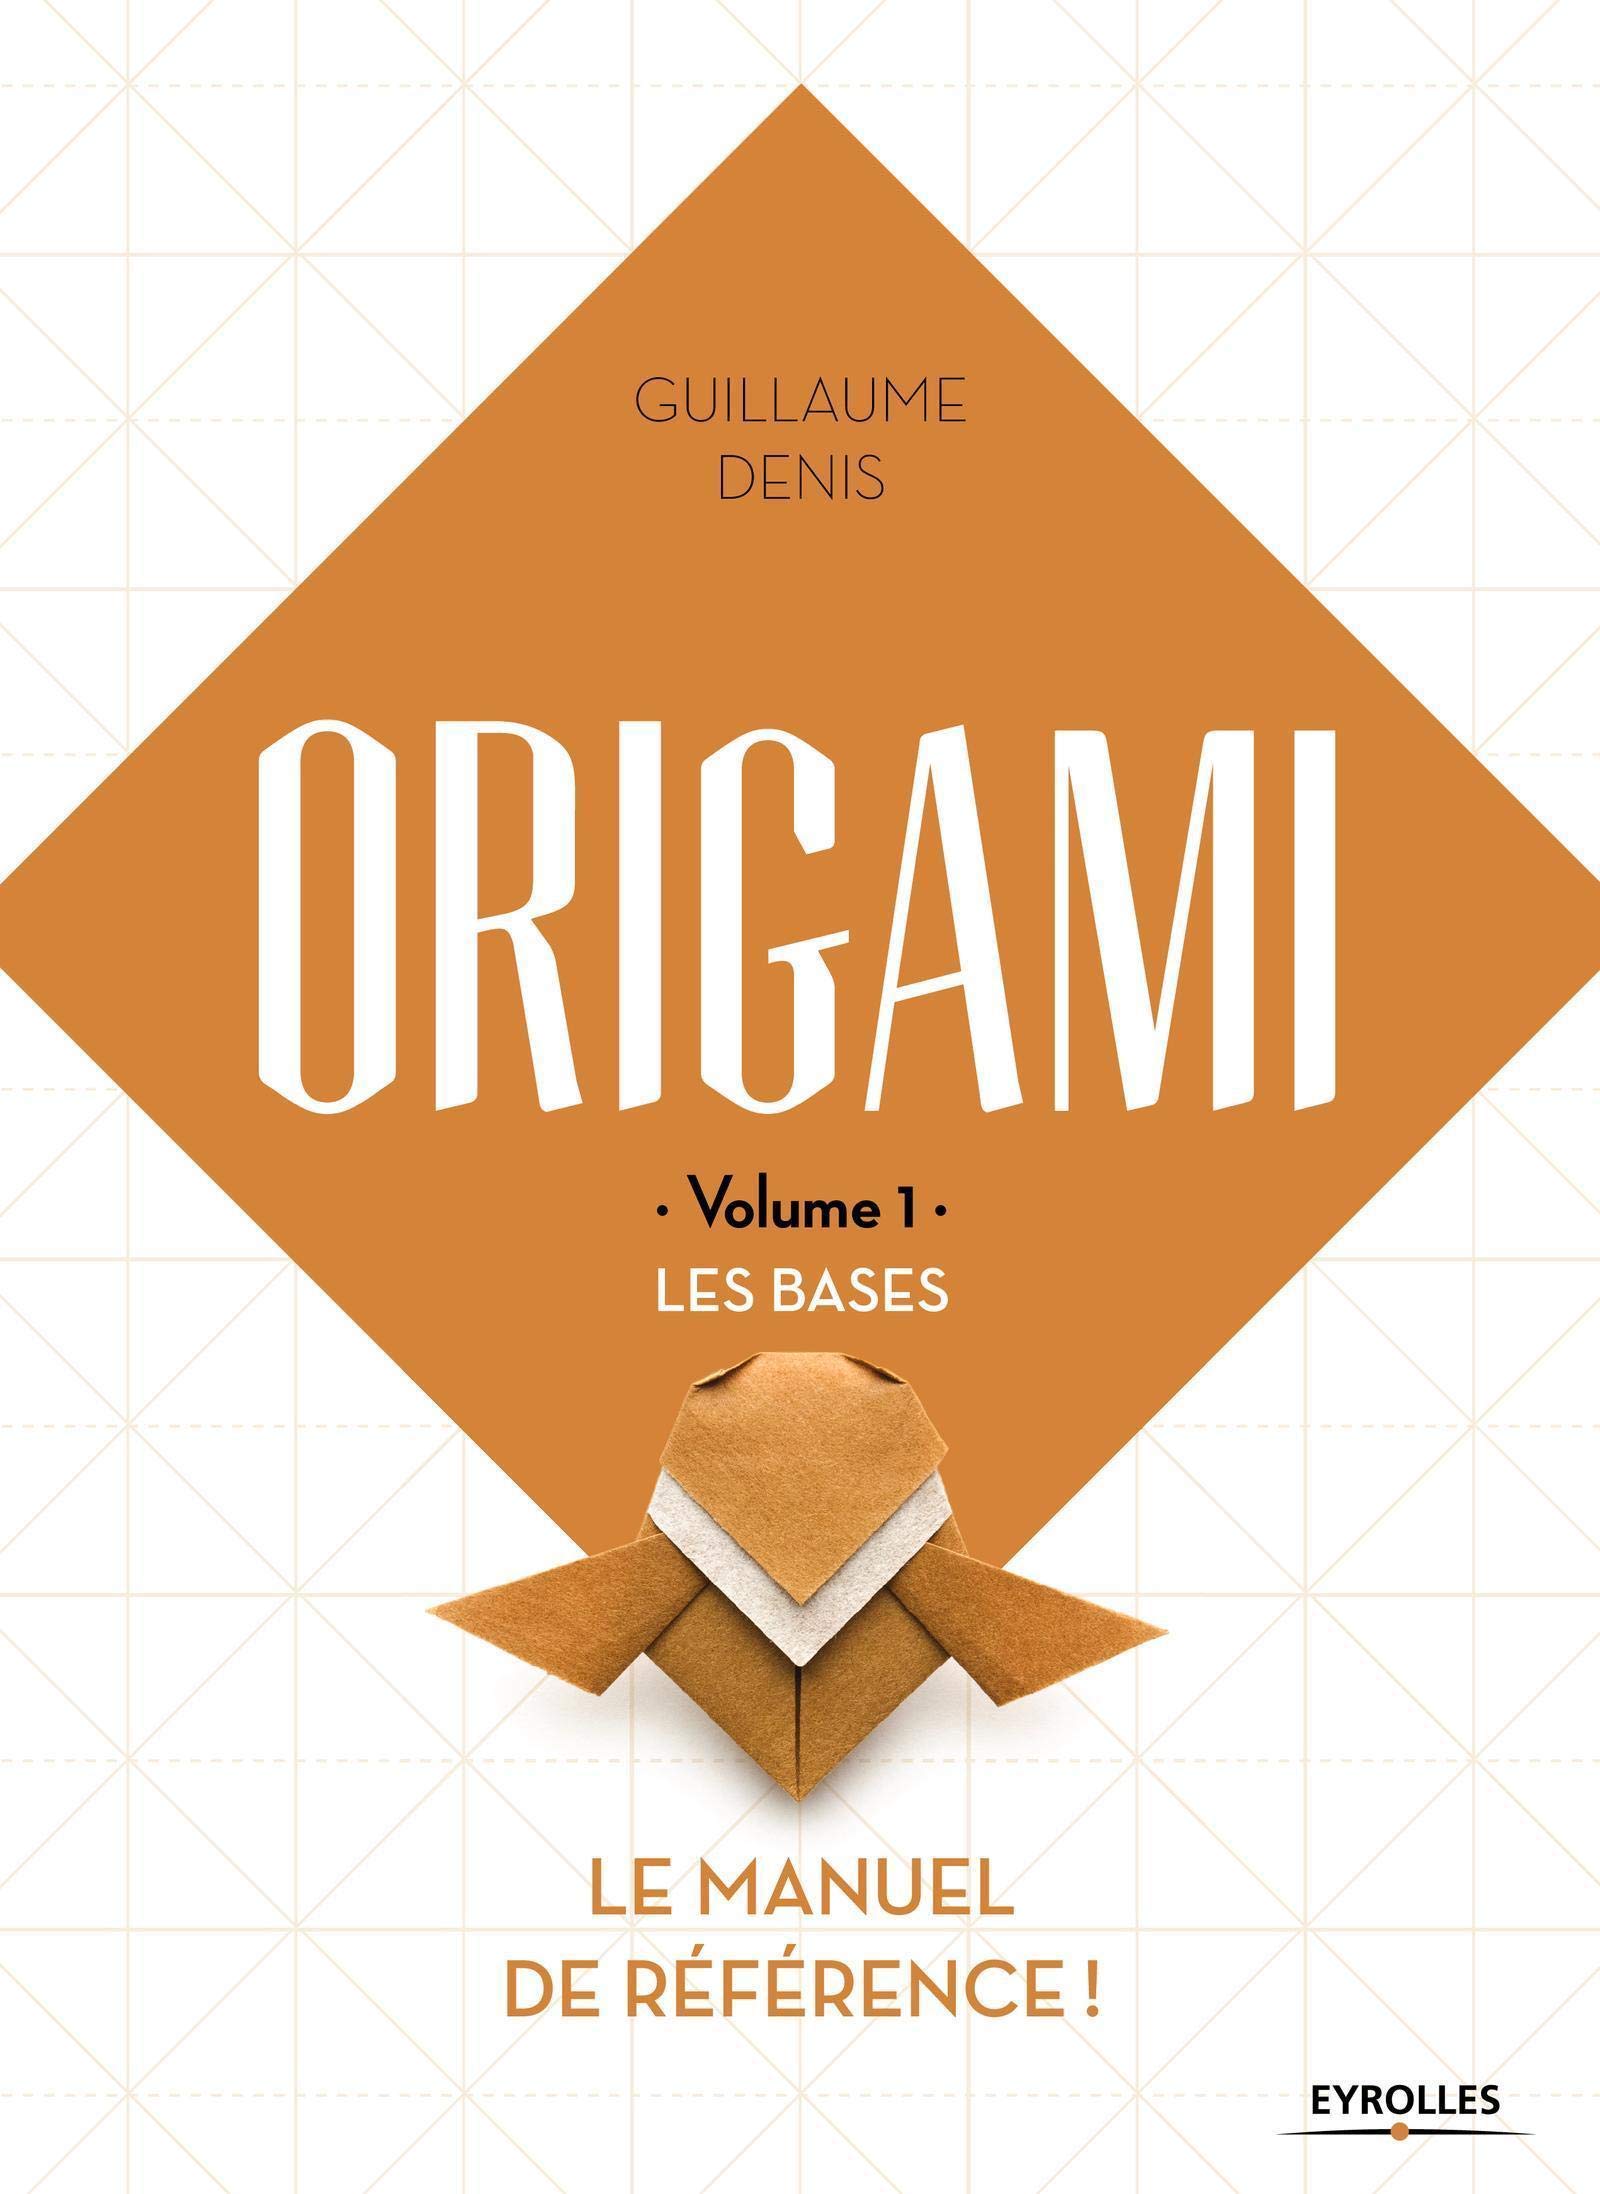 ORIGAMI - Volume 1 - LES BASES : page 143.